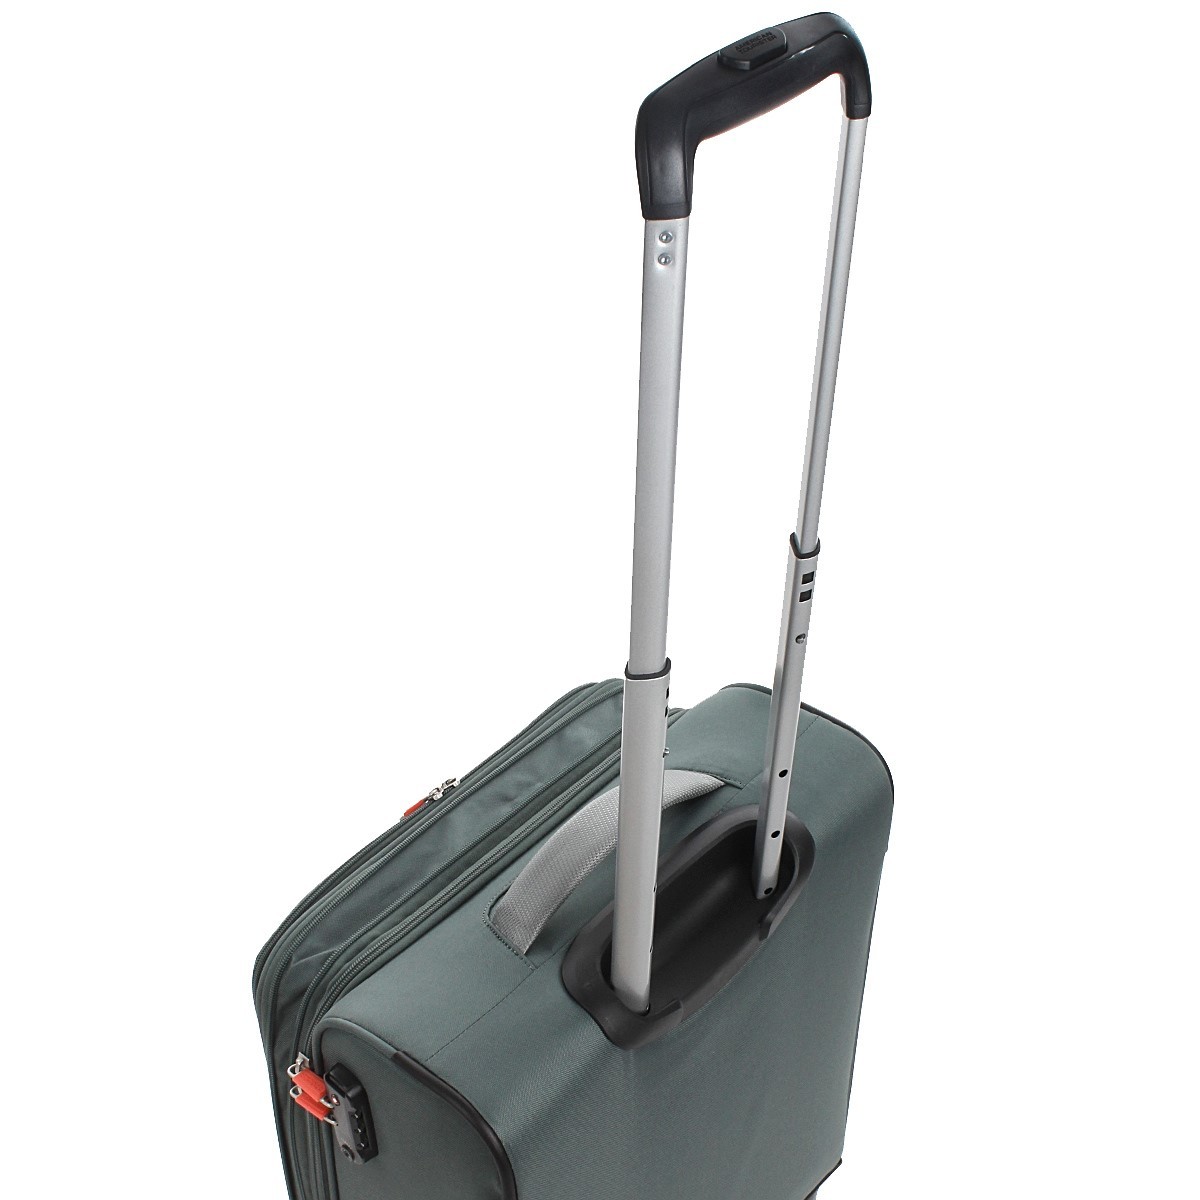 American tourister by samsonite Spinner cabina 4 ruote Dark forest Pulsonic MD6*04001